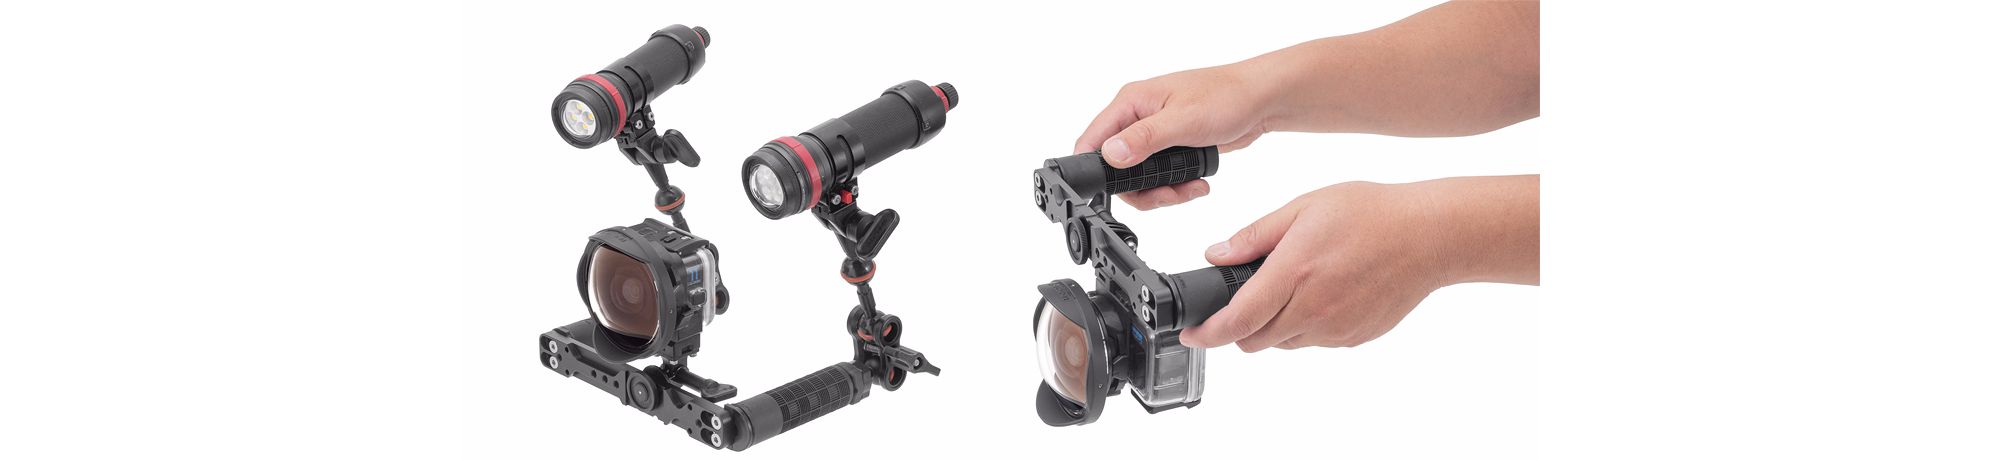 Compact Grip Base for GoPro